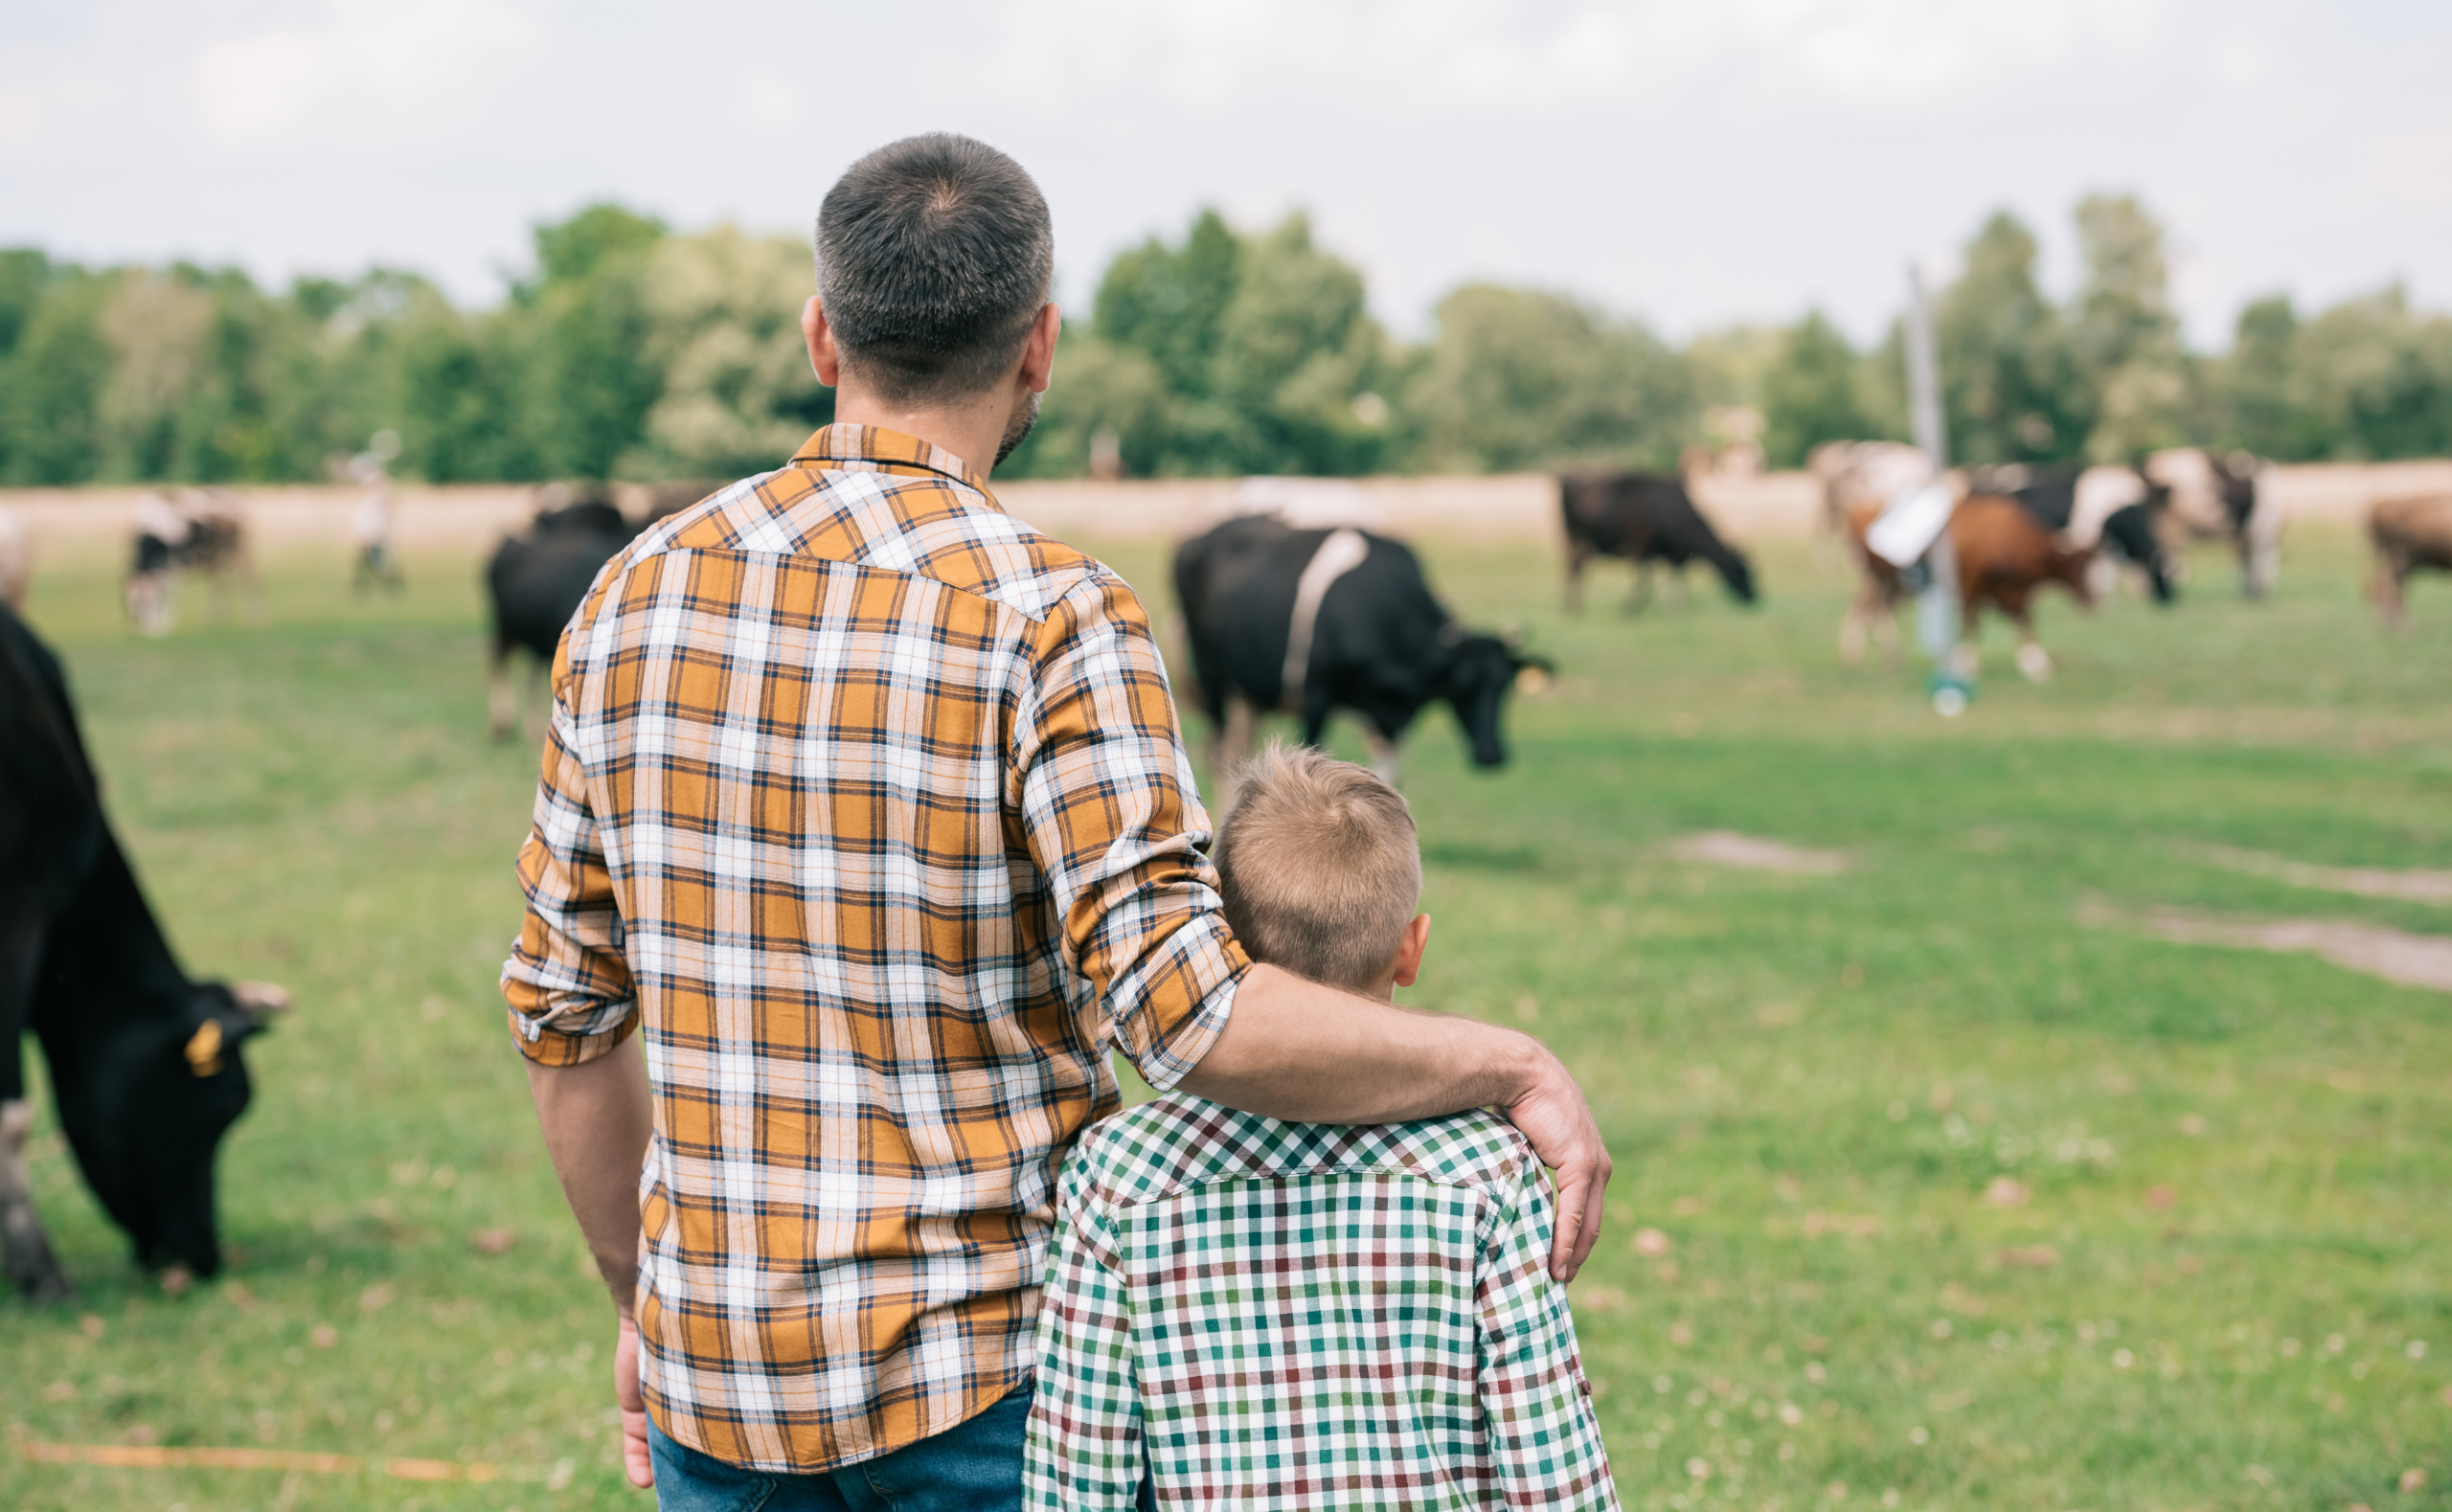 back view of father and son standing together and looking at cows grazing on farm